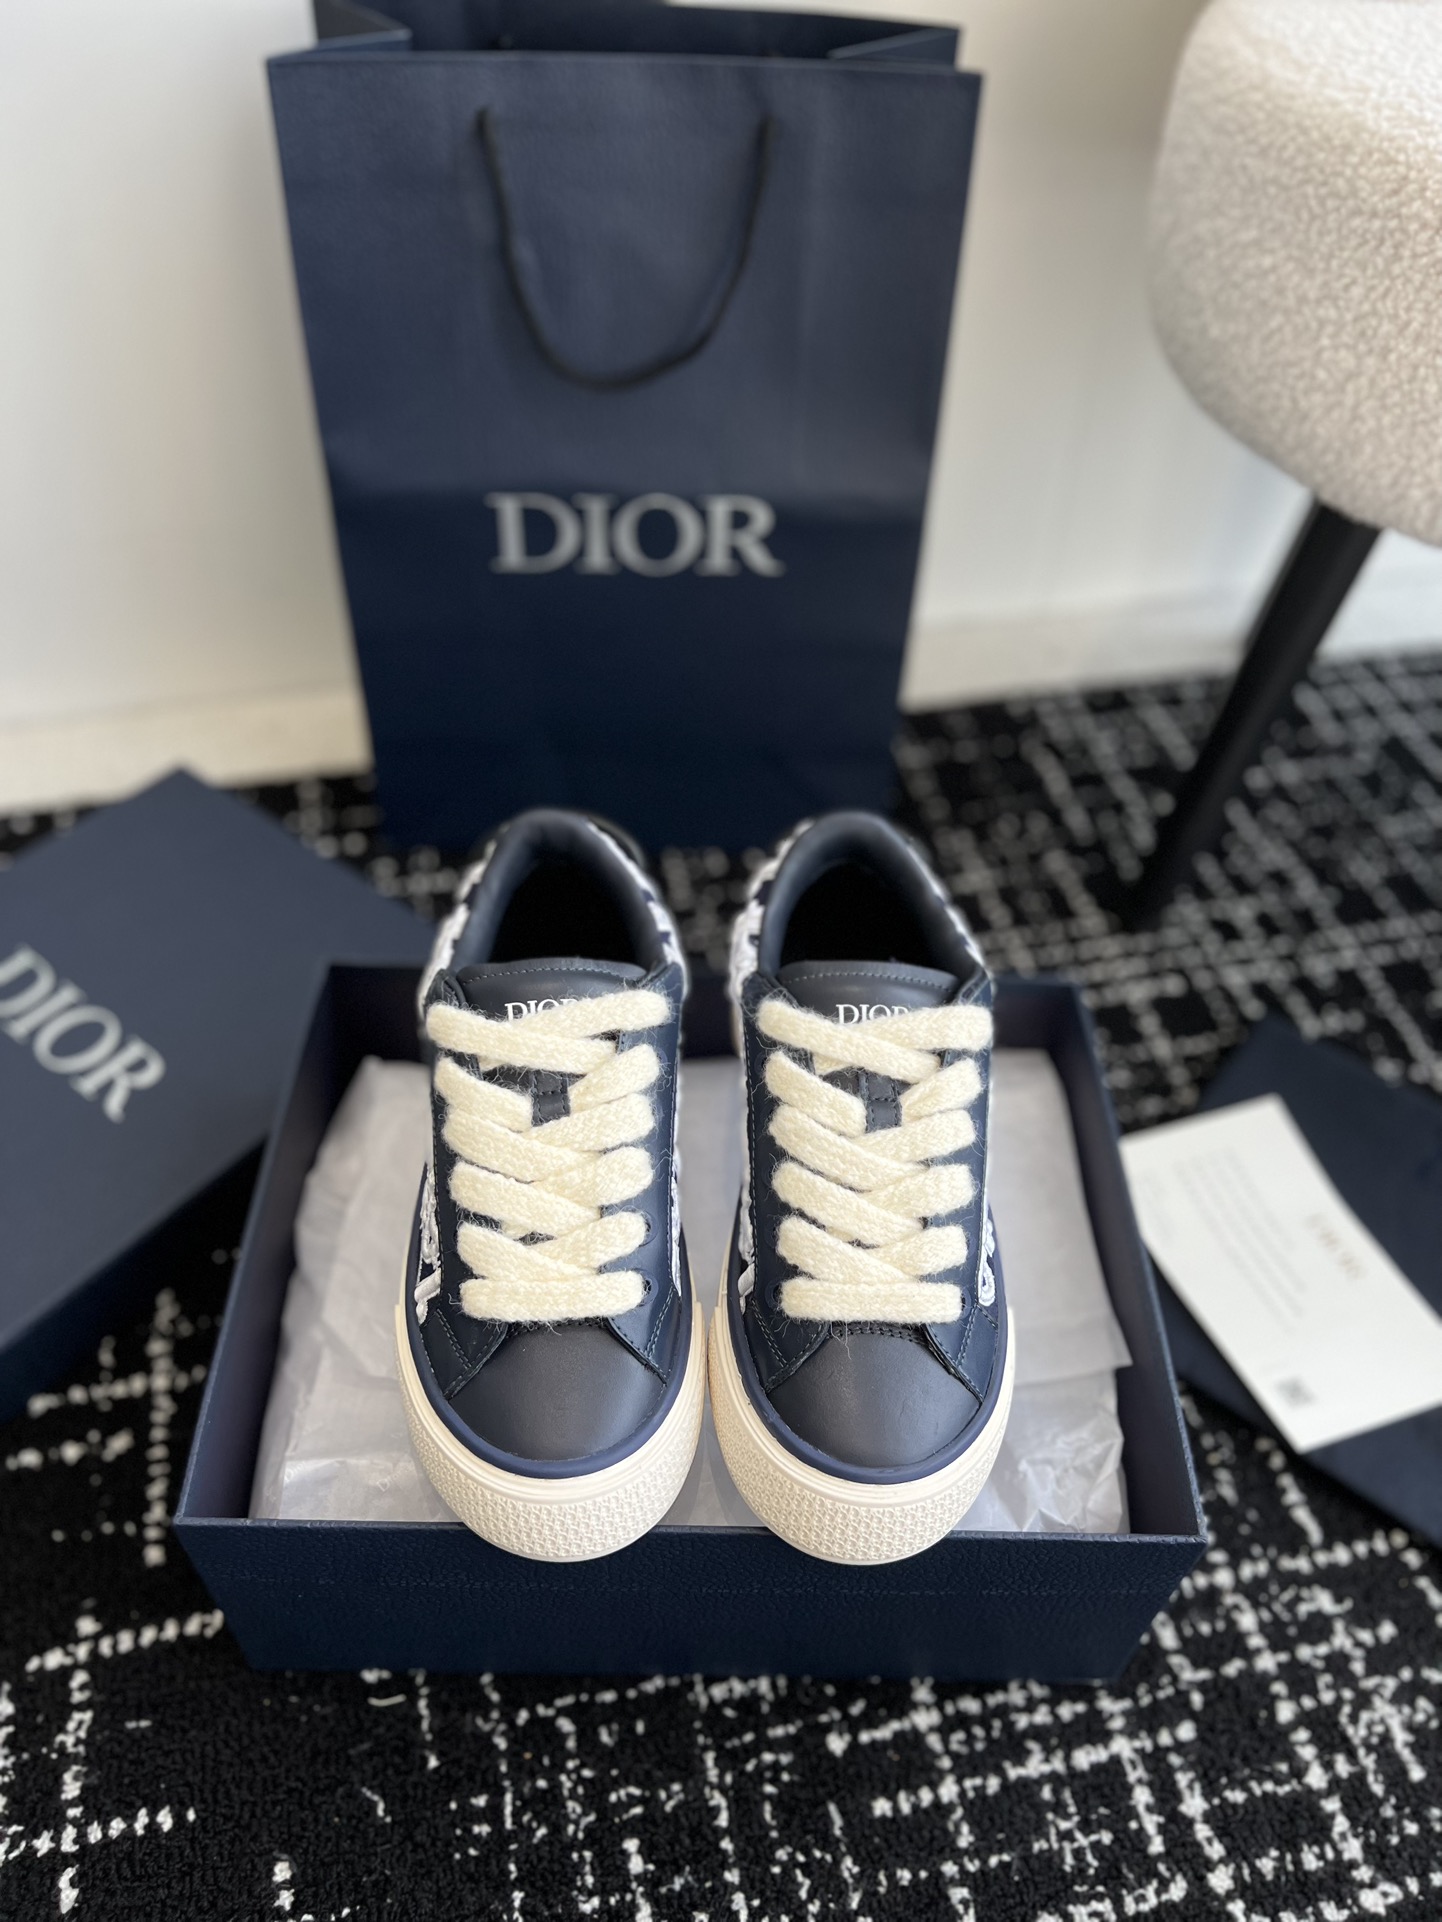 Dior AAAAA+
 Skateboard Shoes Sneakers Casual Shoes White Printing Horsehair Rubber Weave Oblique Casual